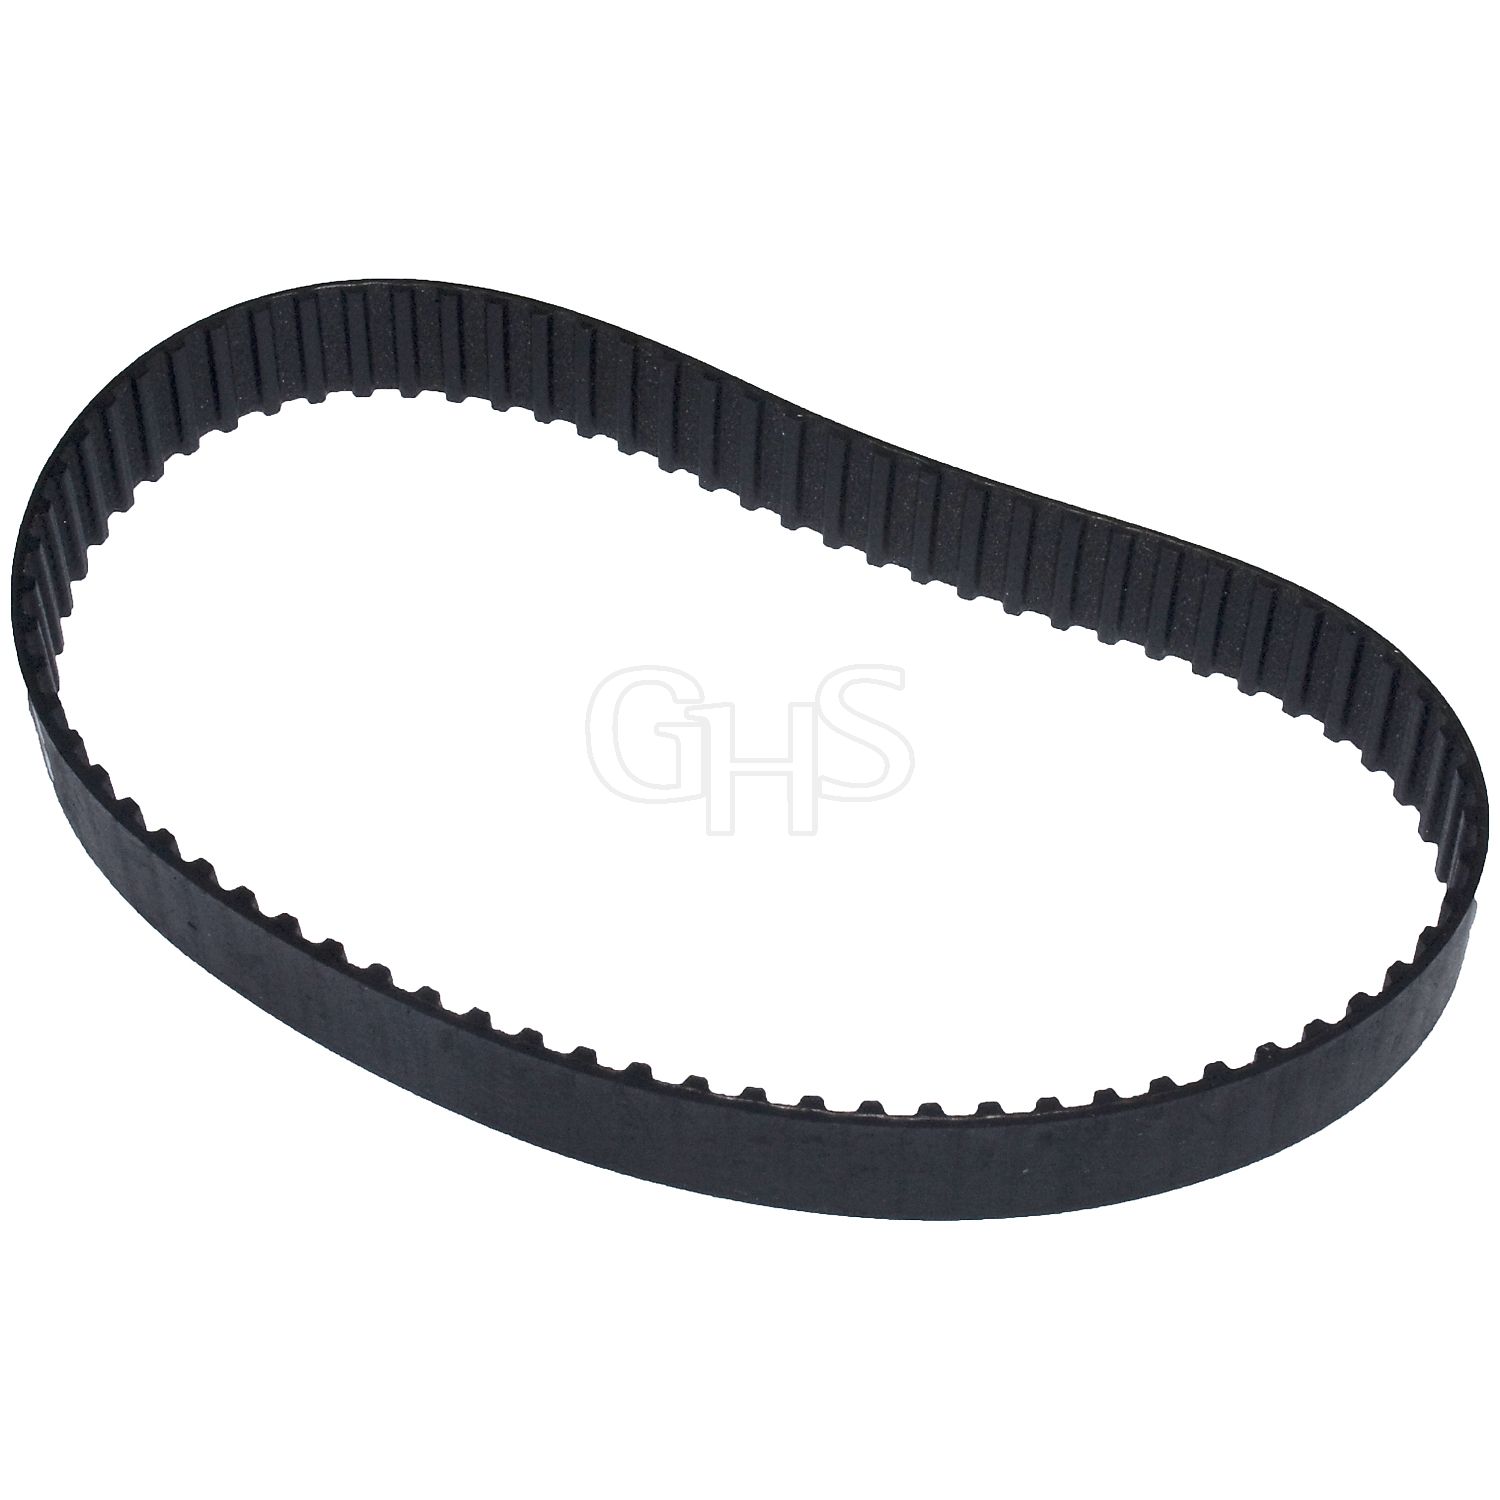 Bosch Genuine F016T41176 Belt Drive Toothed for Qualcast 